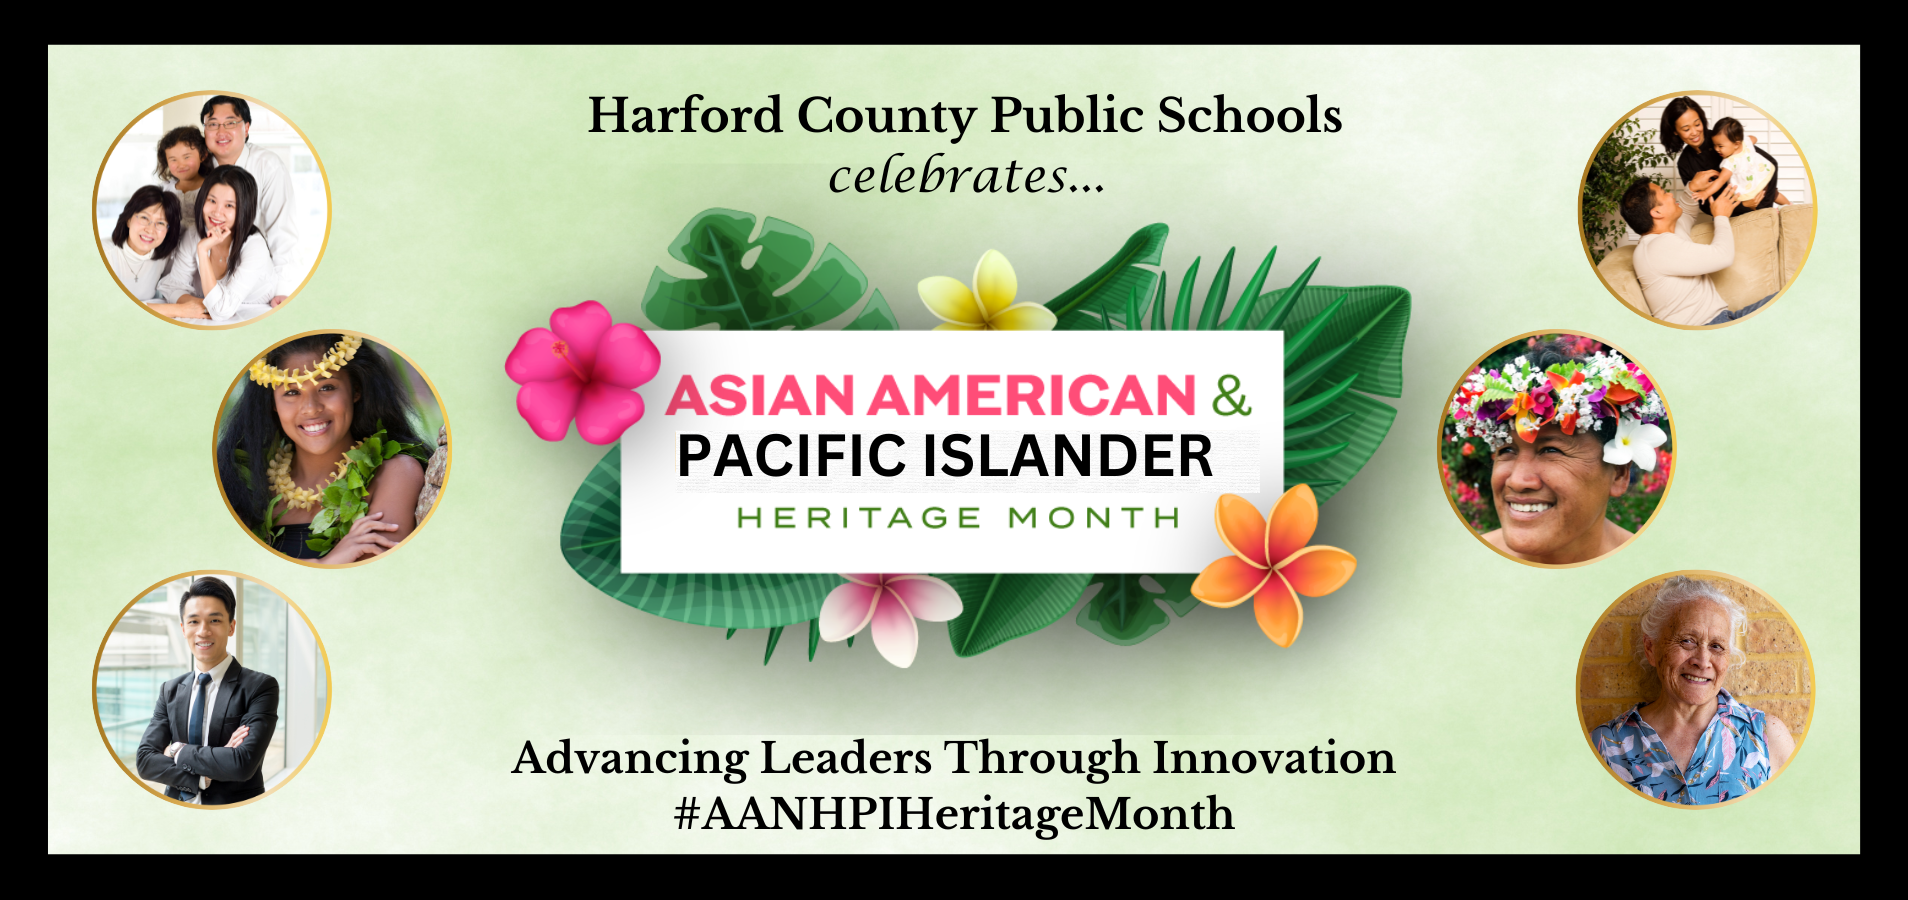 HCPS celebrates Asian American and Pacific Islander Heritage Month